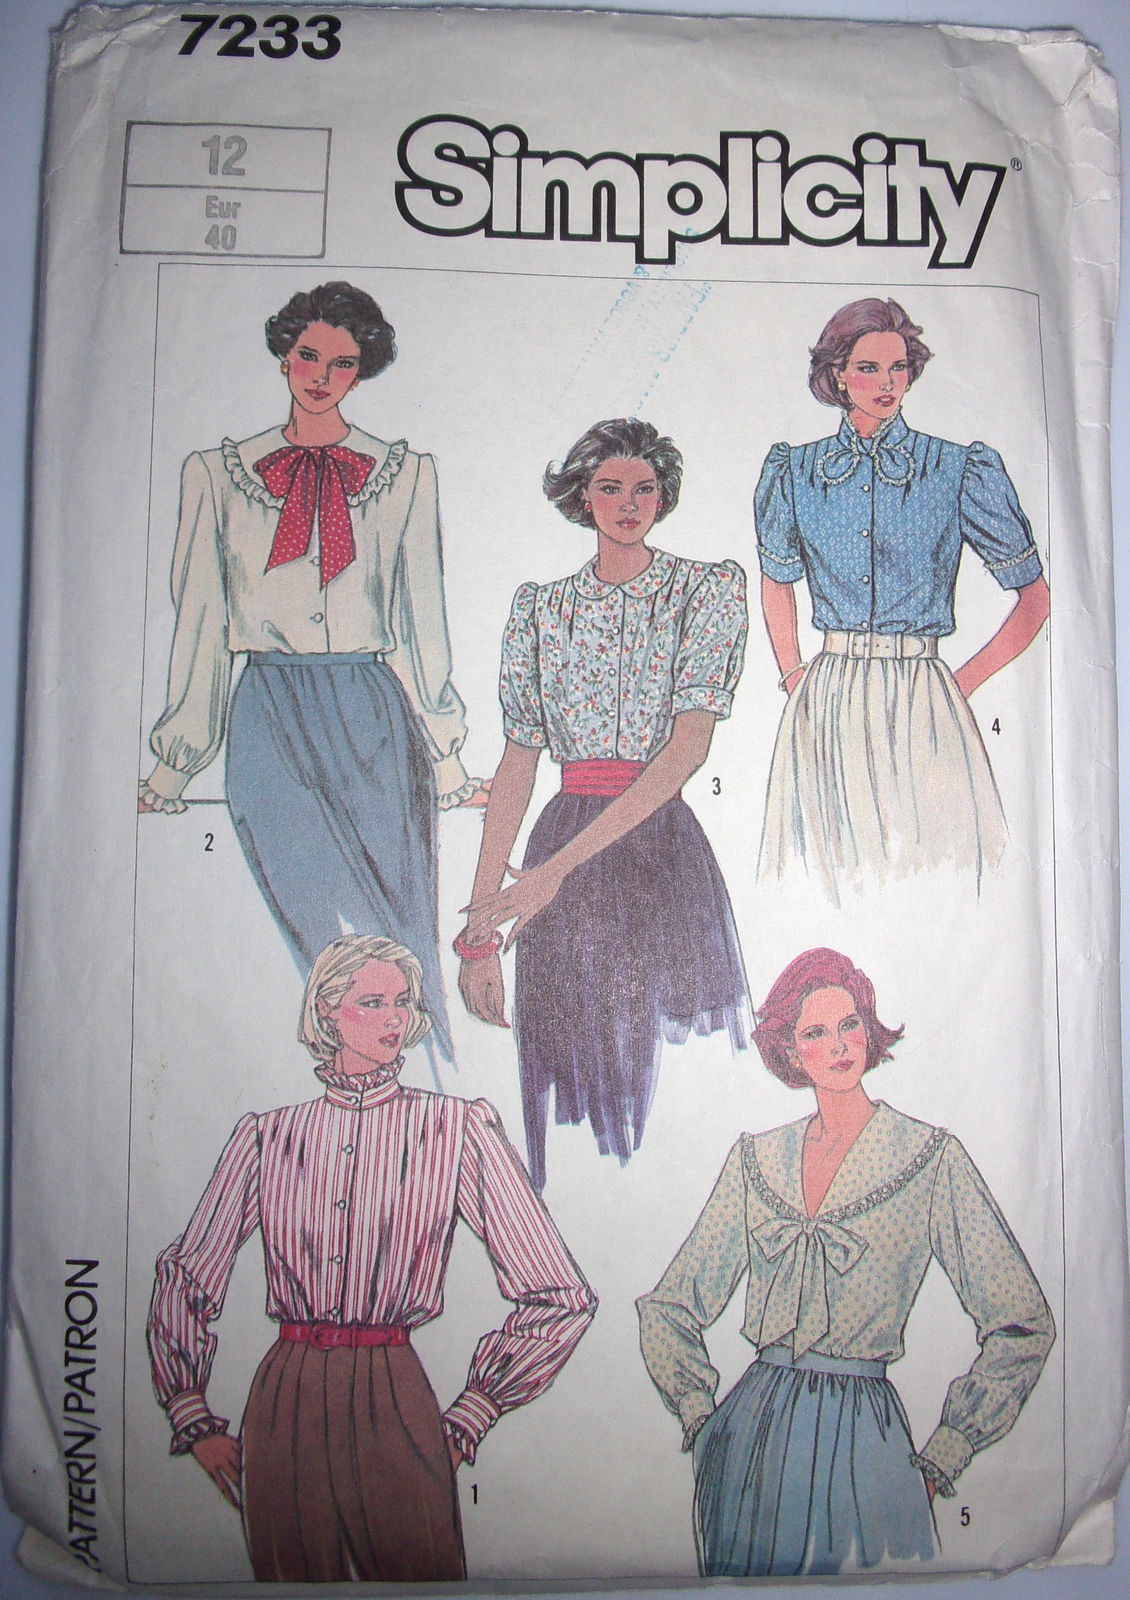 Primary image for Simplicity Misses Blouse Size 12 #7233